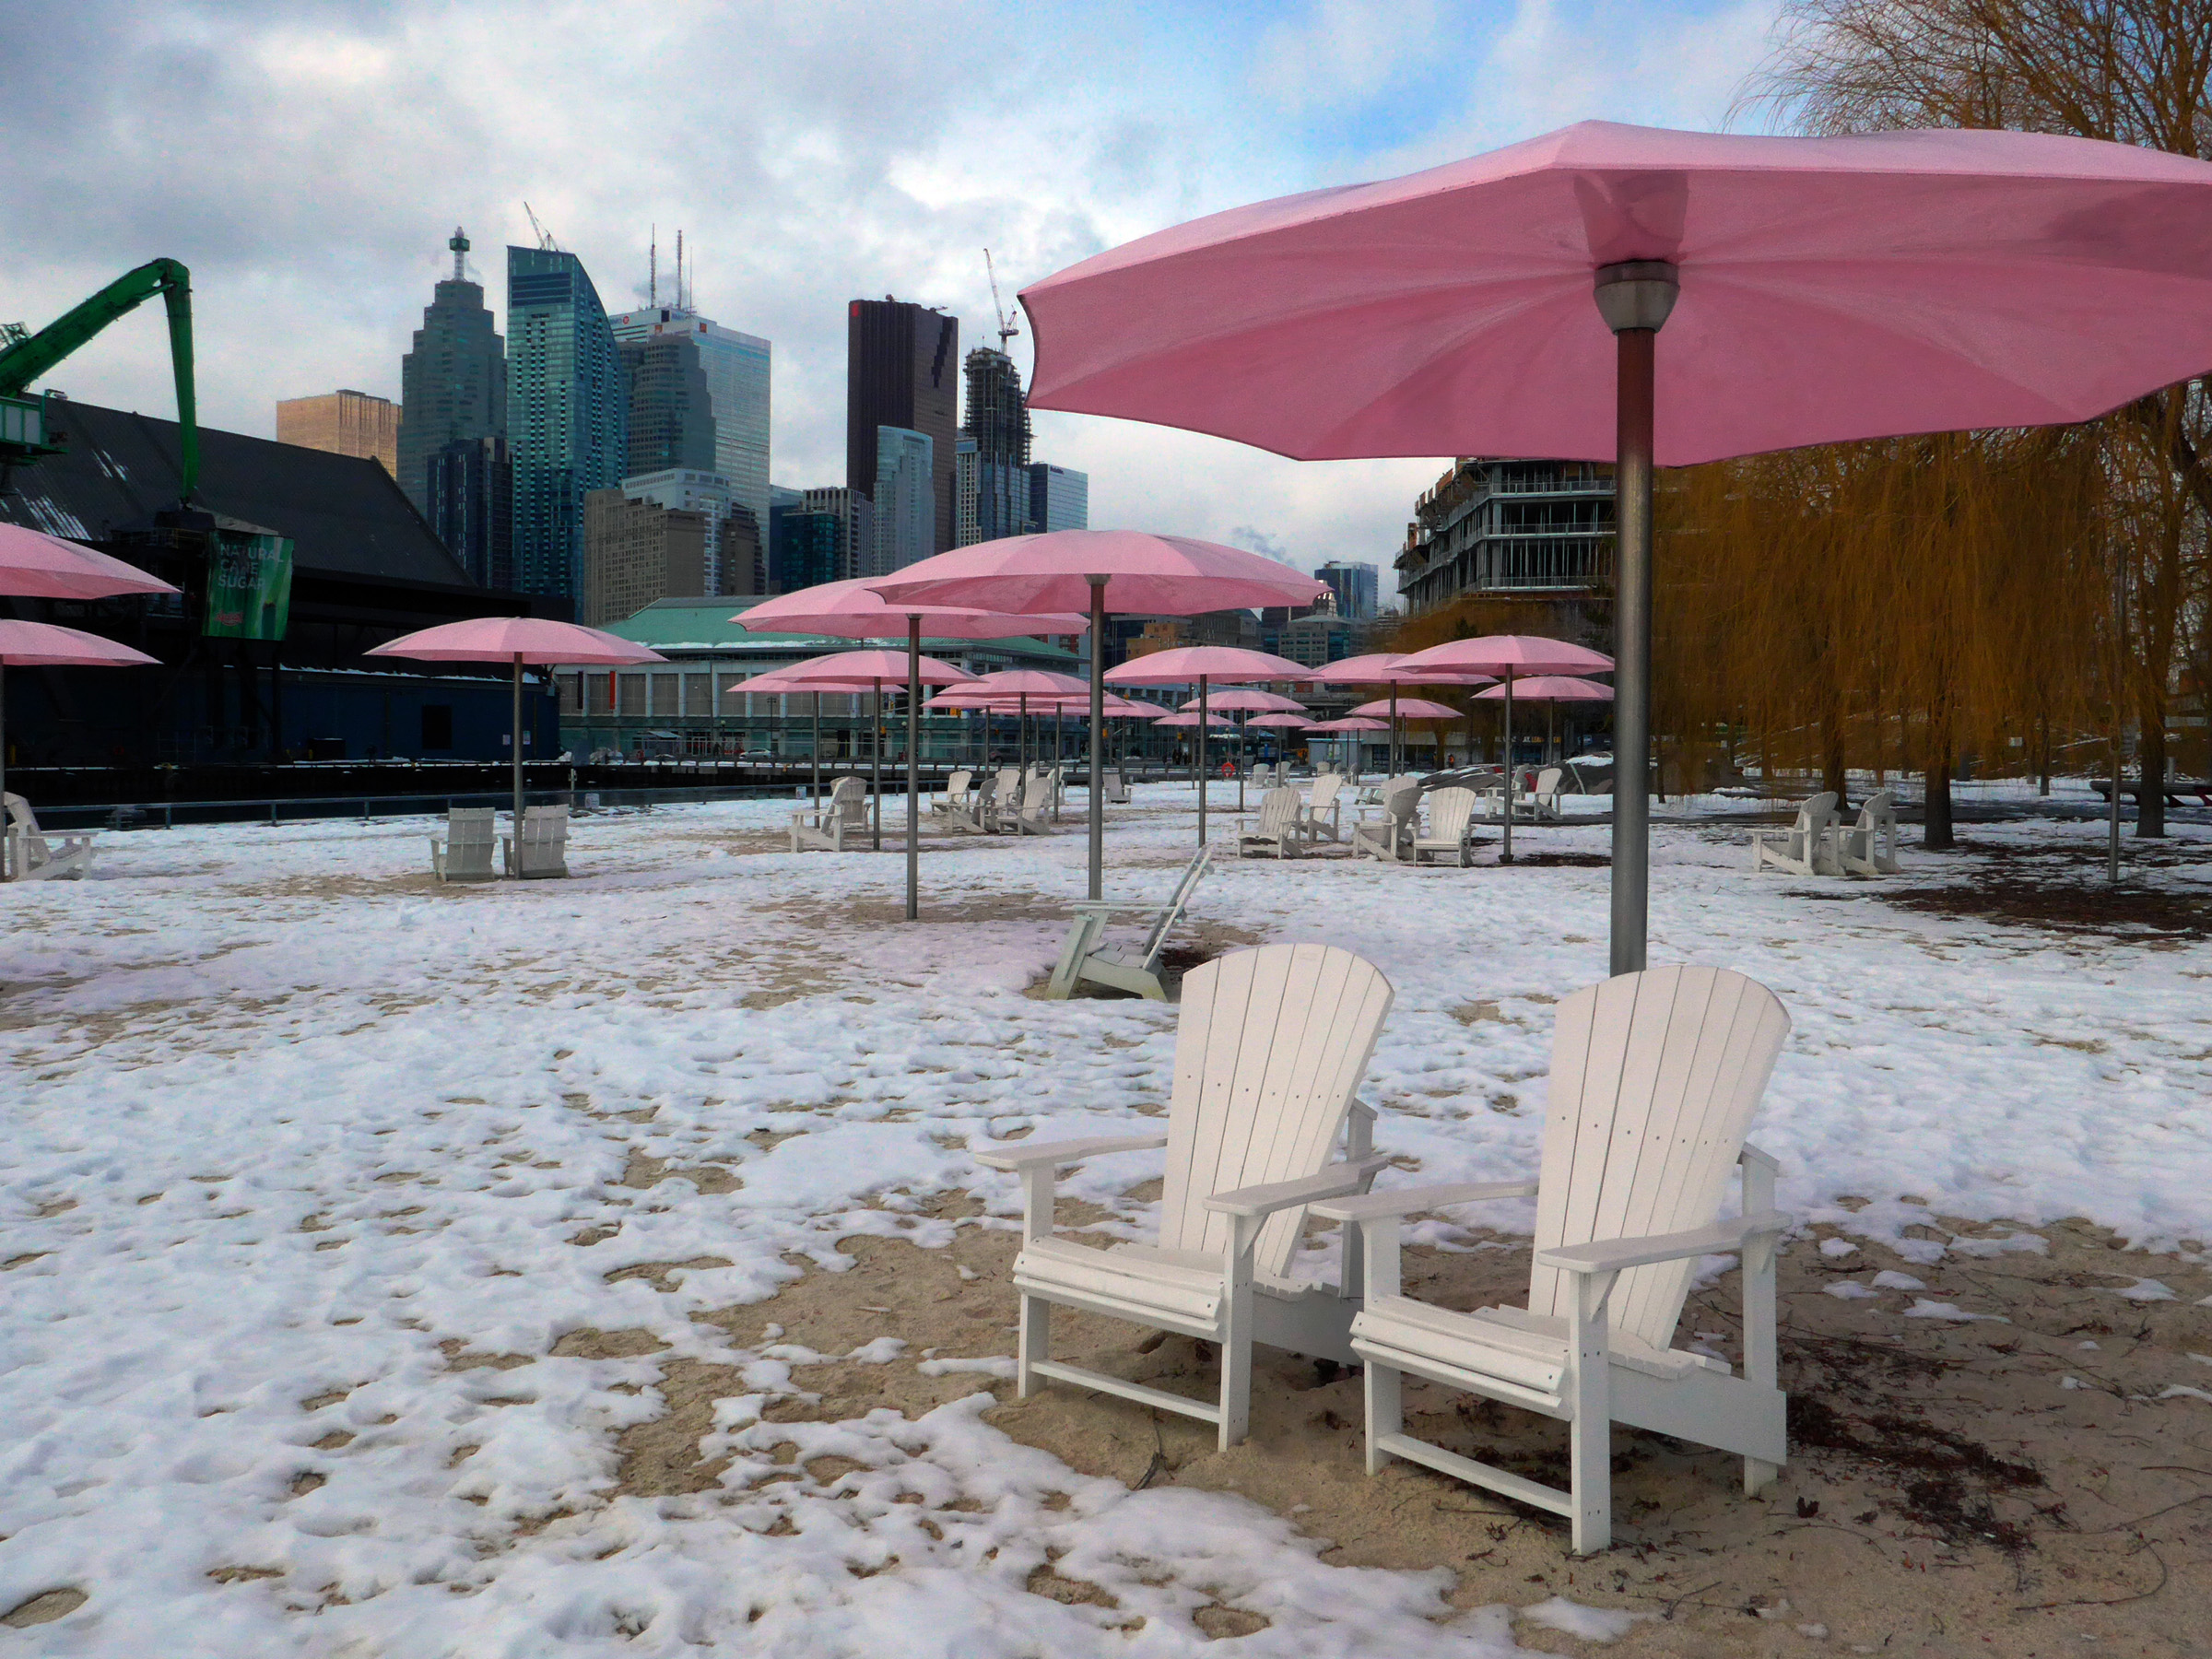 Image of sugarbeach in the winter